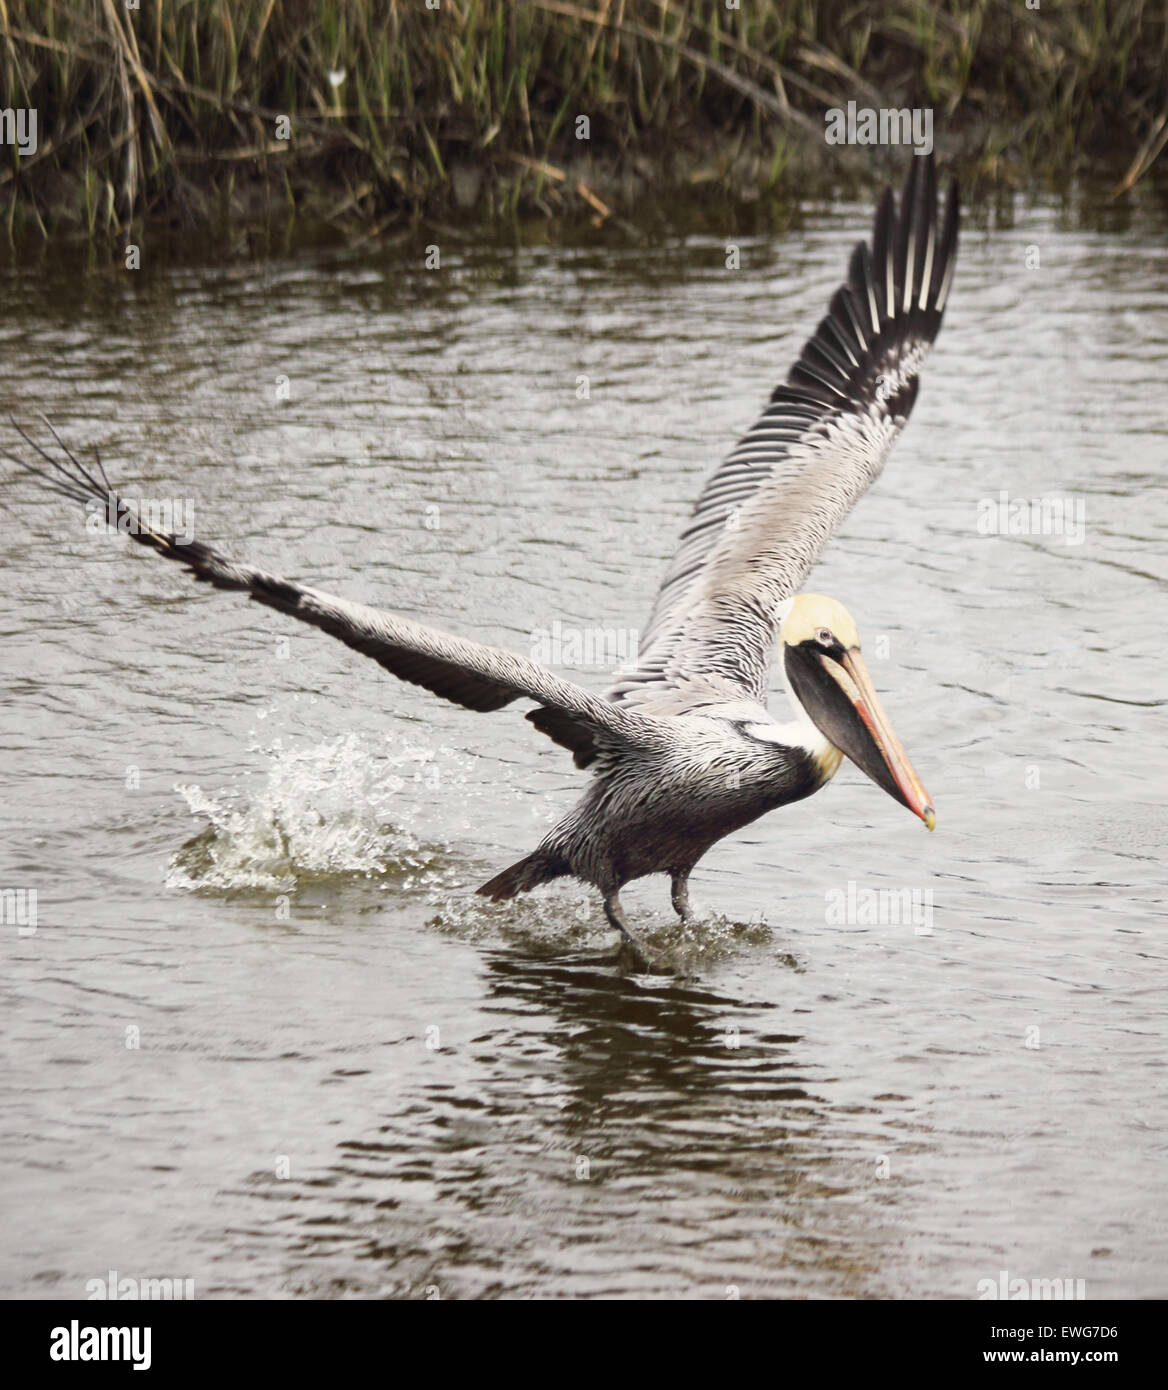 A male Brown pelican lands upon the water in a coastal estuary. Stock Photo